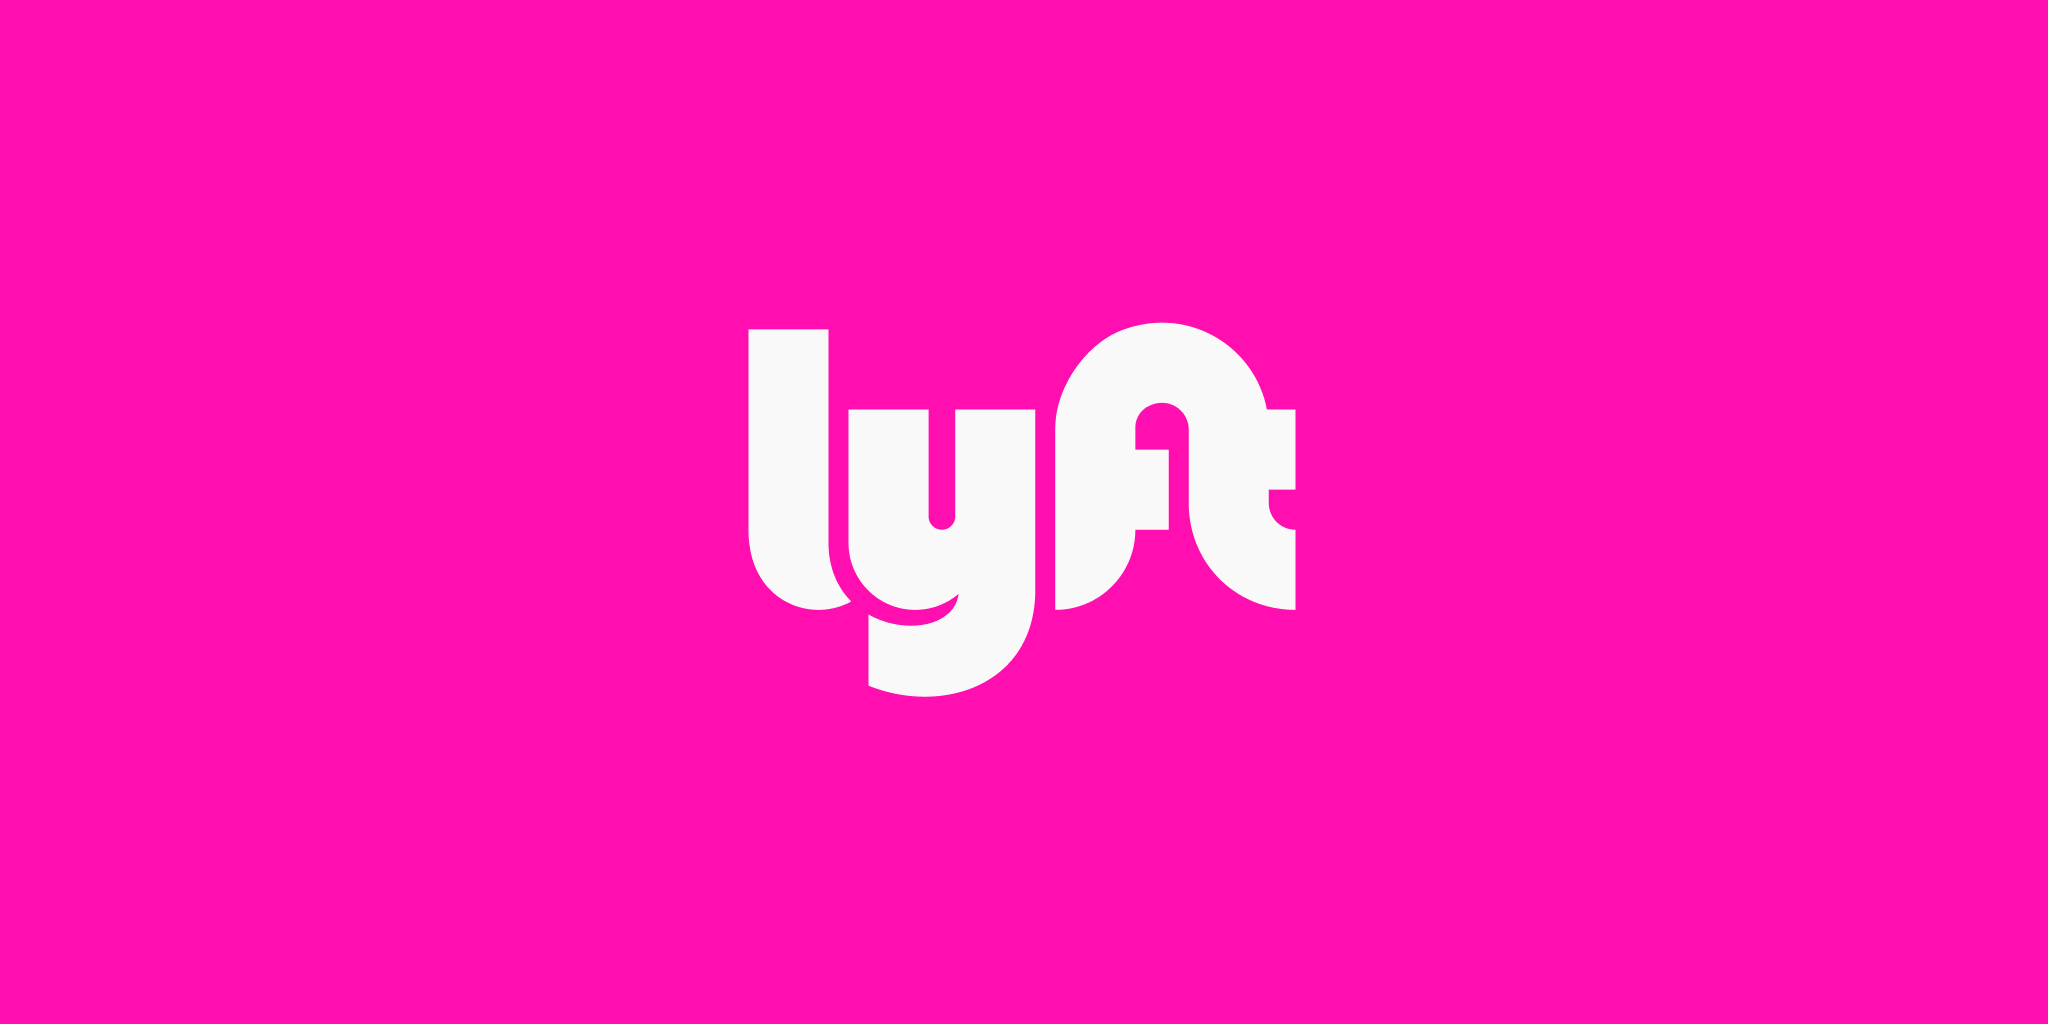 Is Lyft For Sale? This Analyst Believes Takeover Rumors Have 'Little Validation'